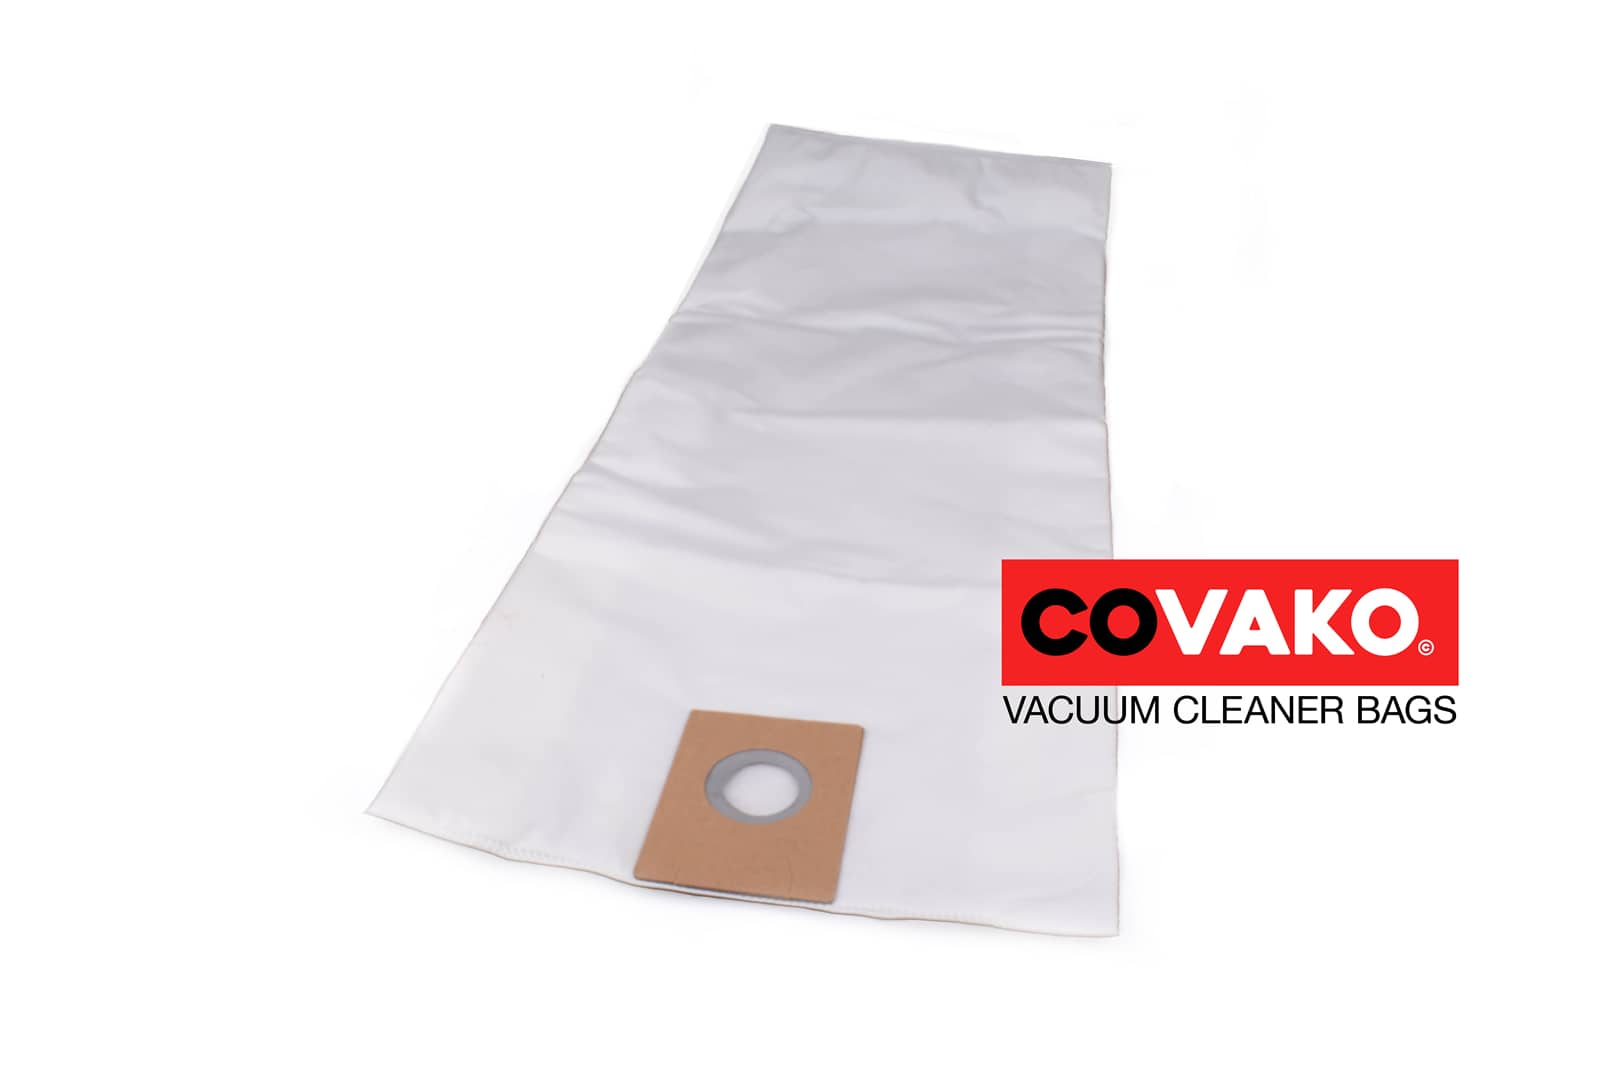 Fimap FV 80 / Synthesis - Fimap vacuum cleaner bags